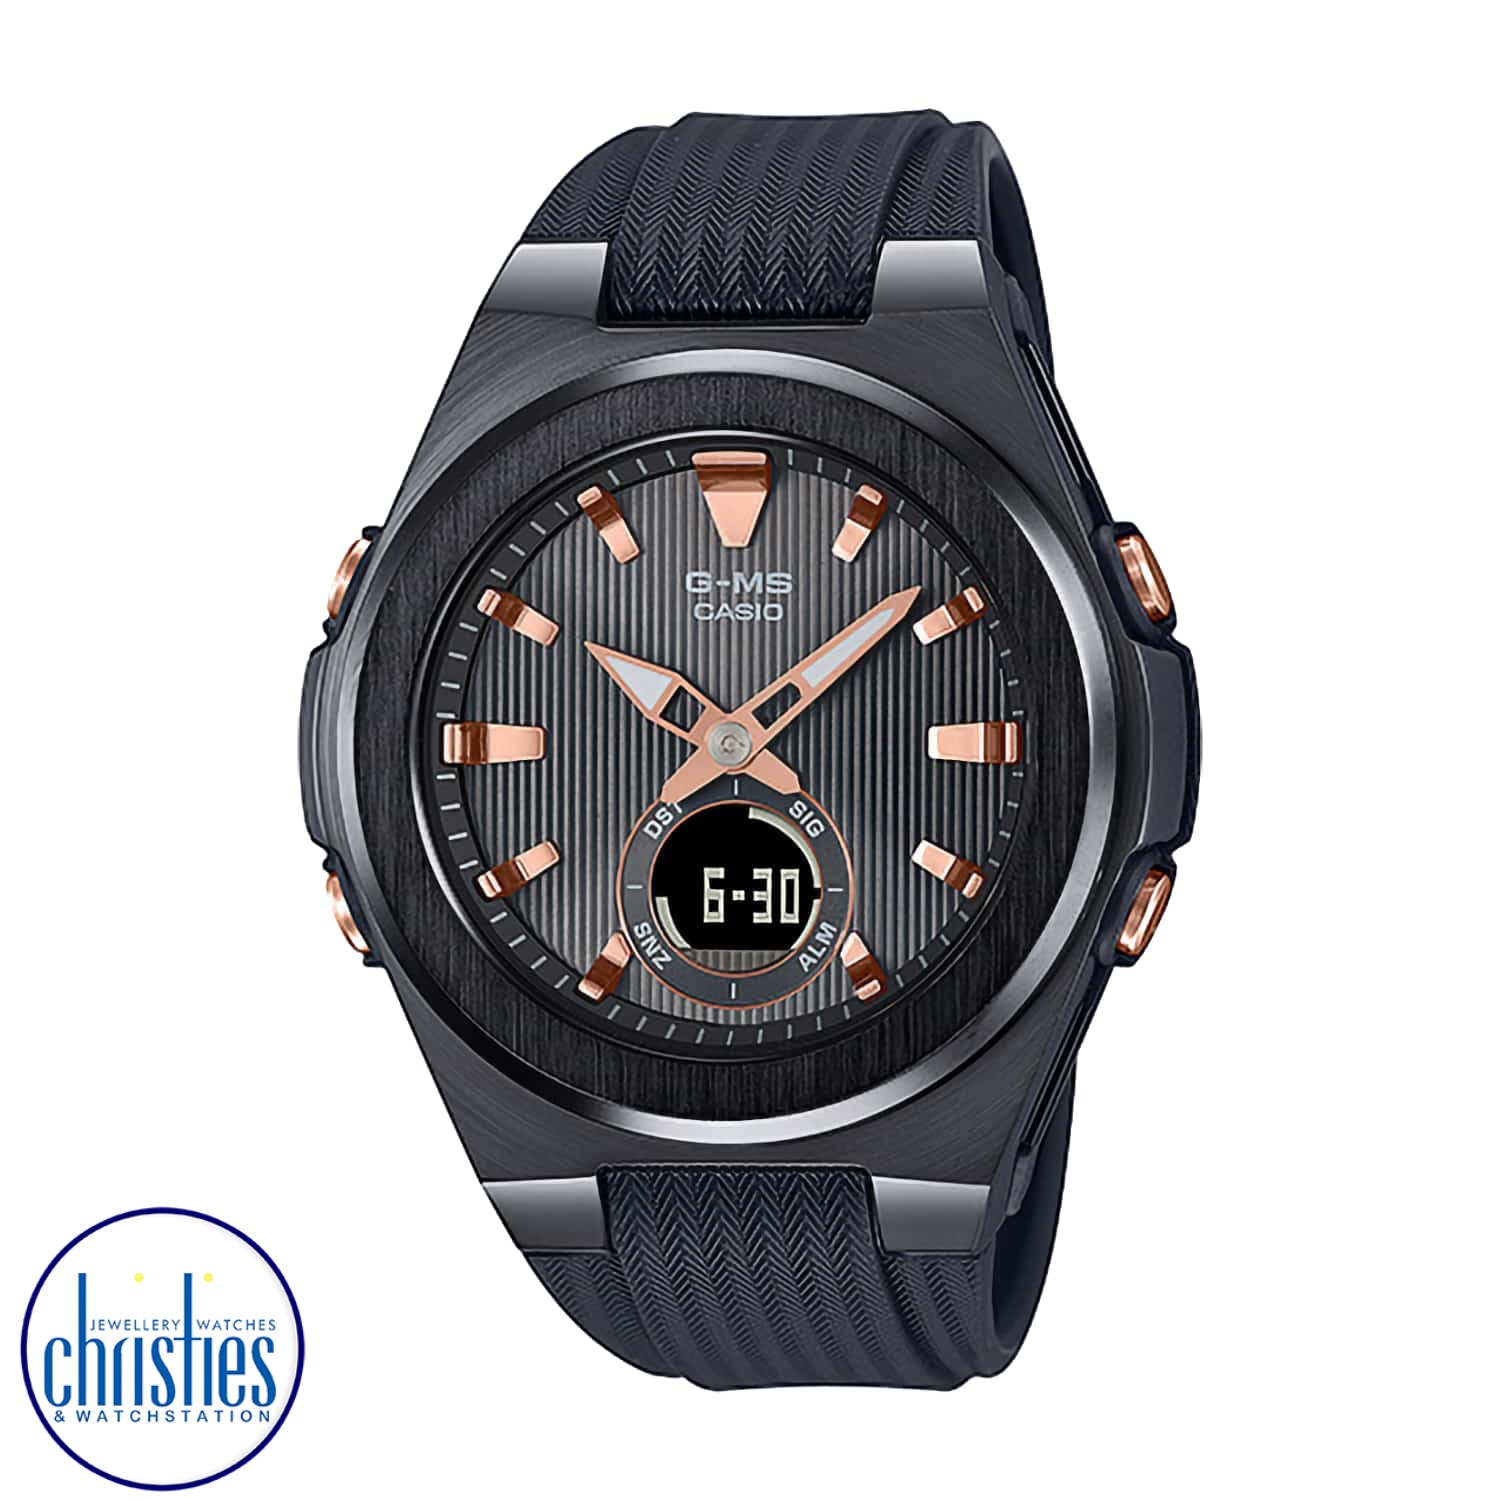 MSGC150G-1A BABY-G G-MS Watch. Stay on top of your game at work and at play with sophisticated comfort and G-SHOCK strength in a special silky-smooth G-MS timepiece. The oversized case makes a bold, powerful statement. Add in the flat bezel and distin G-s